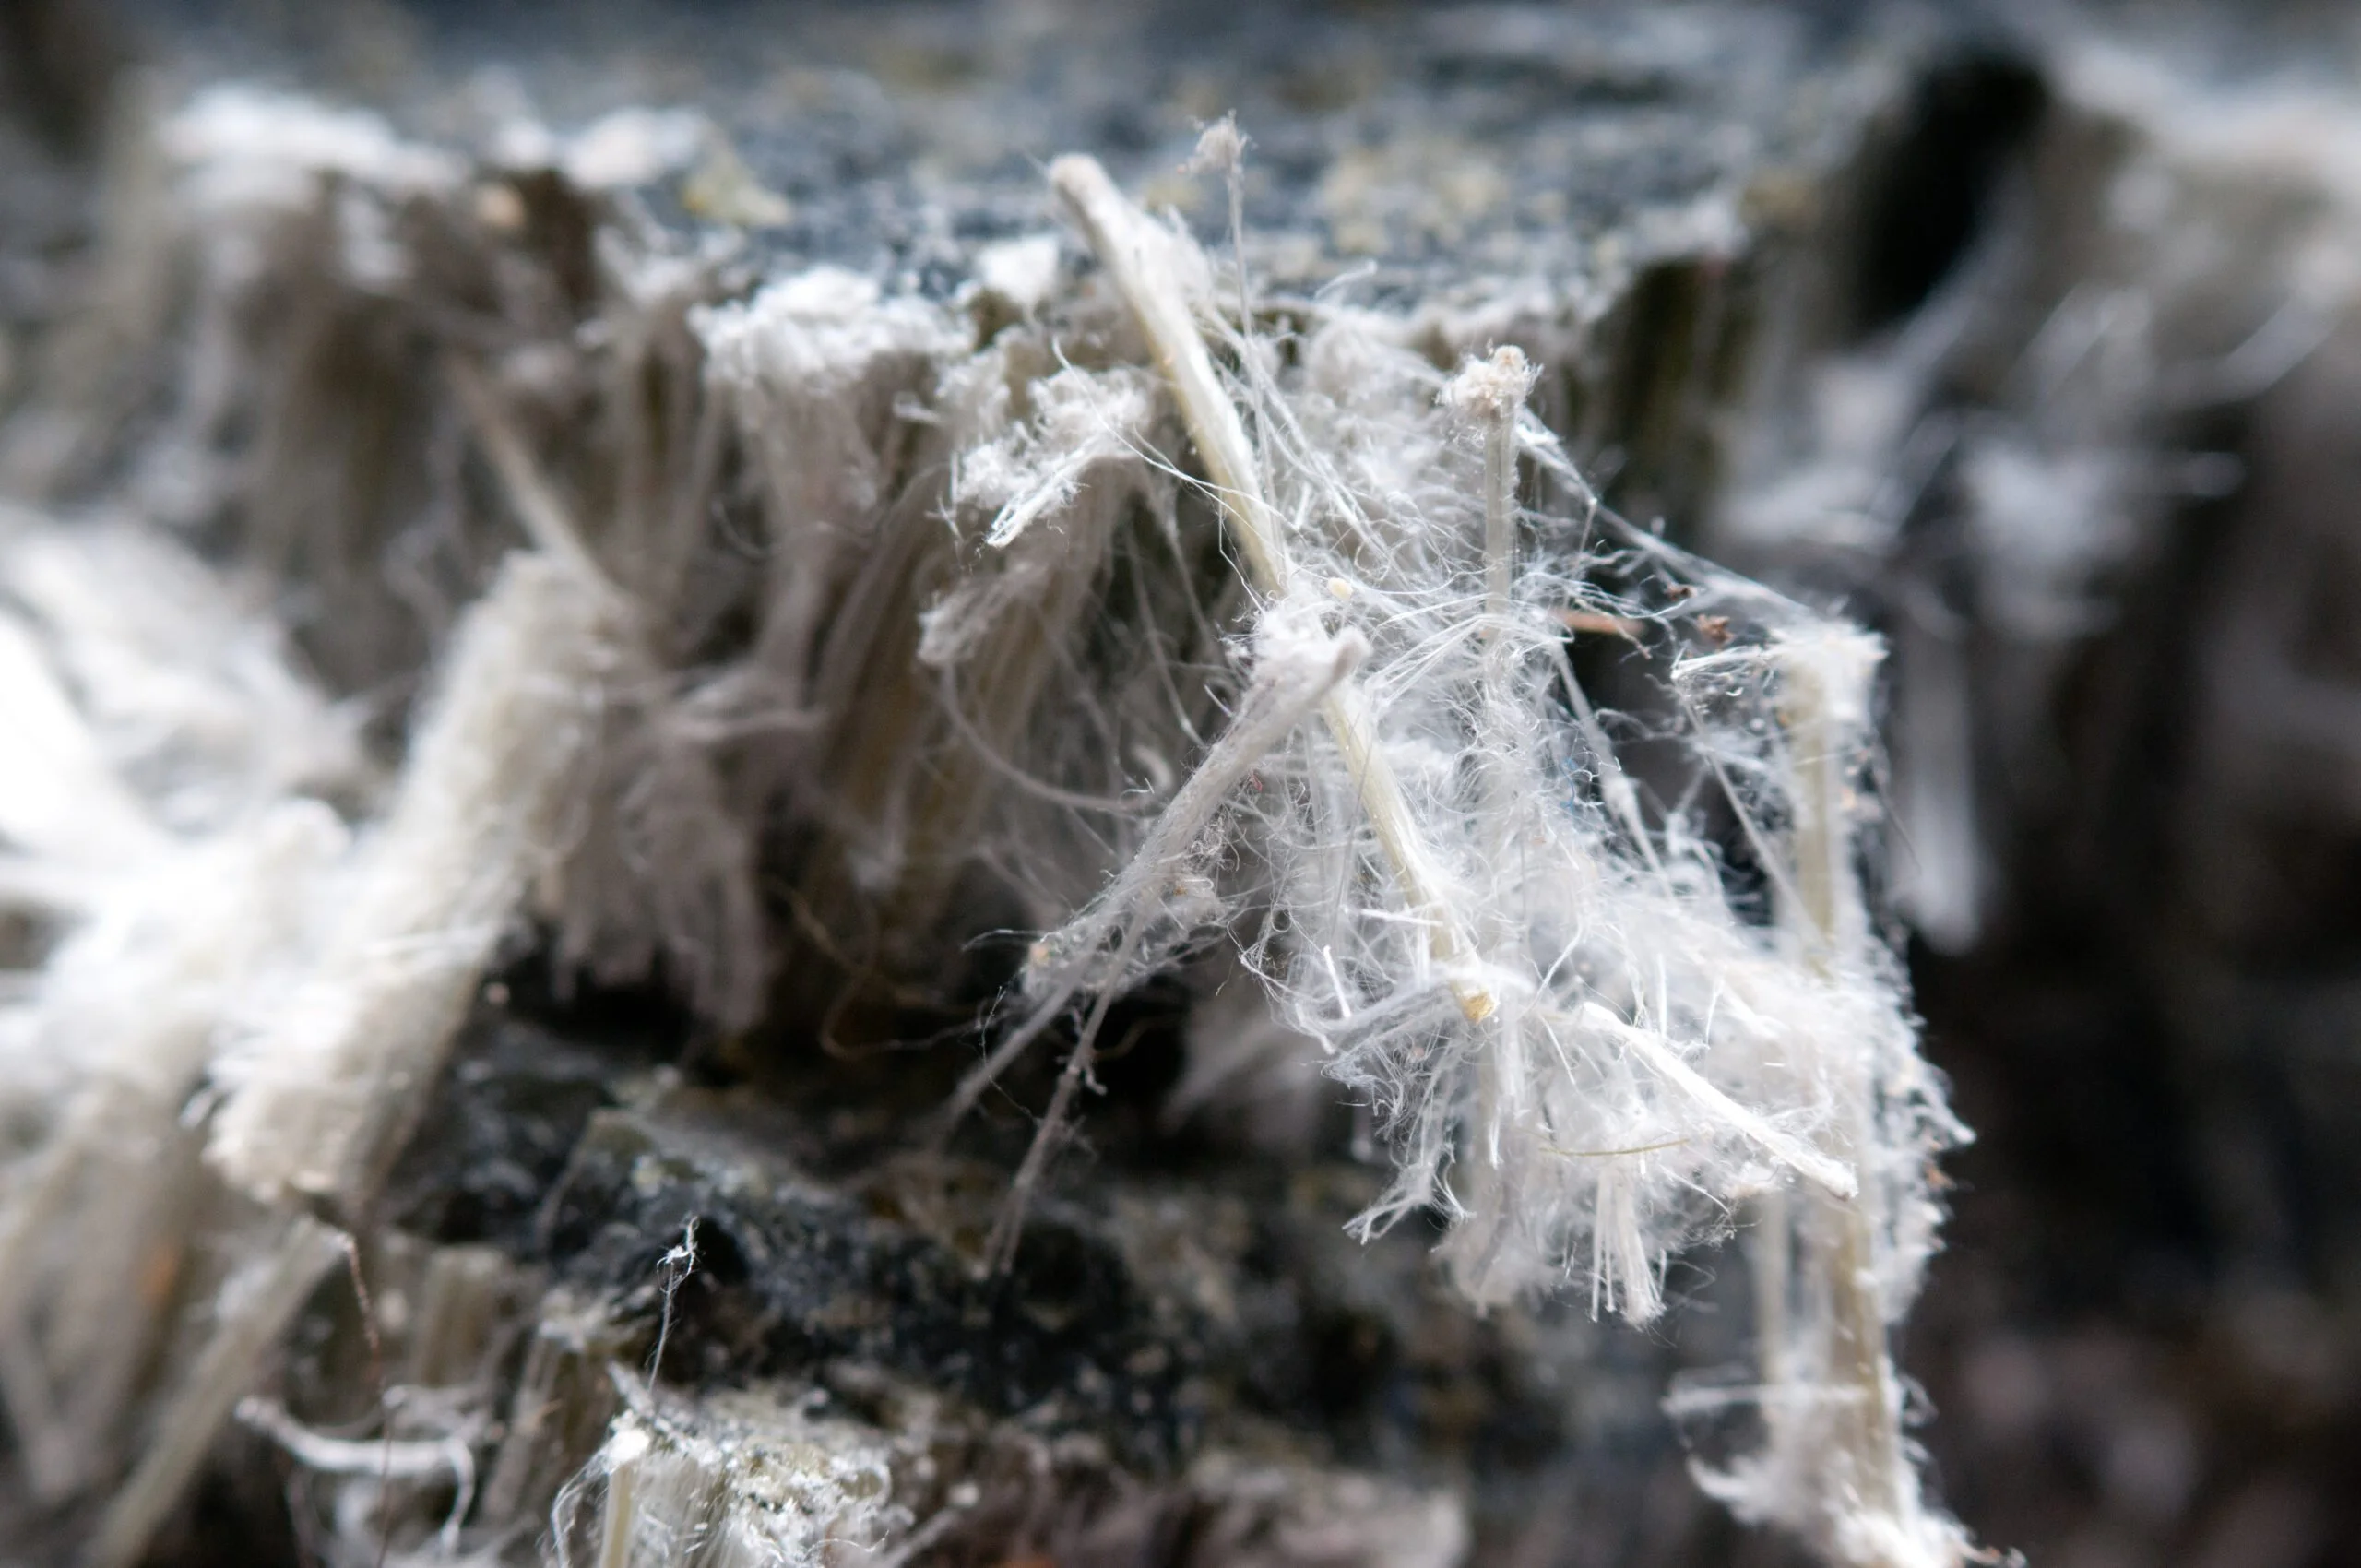 Slash Asbestos Removal Costs 2023 S Savvy Investor Guide New Western